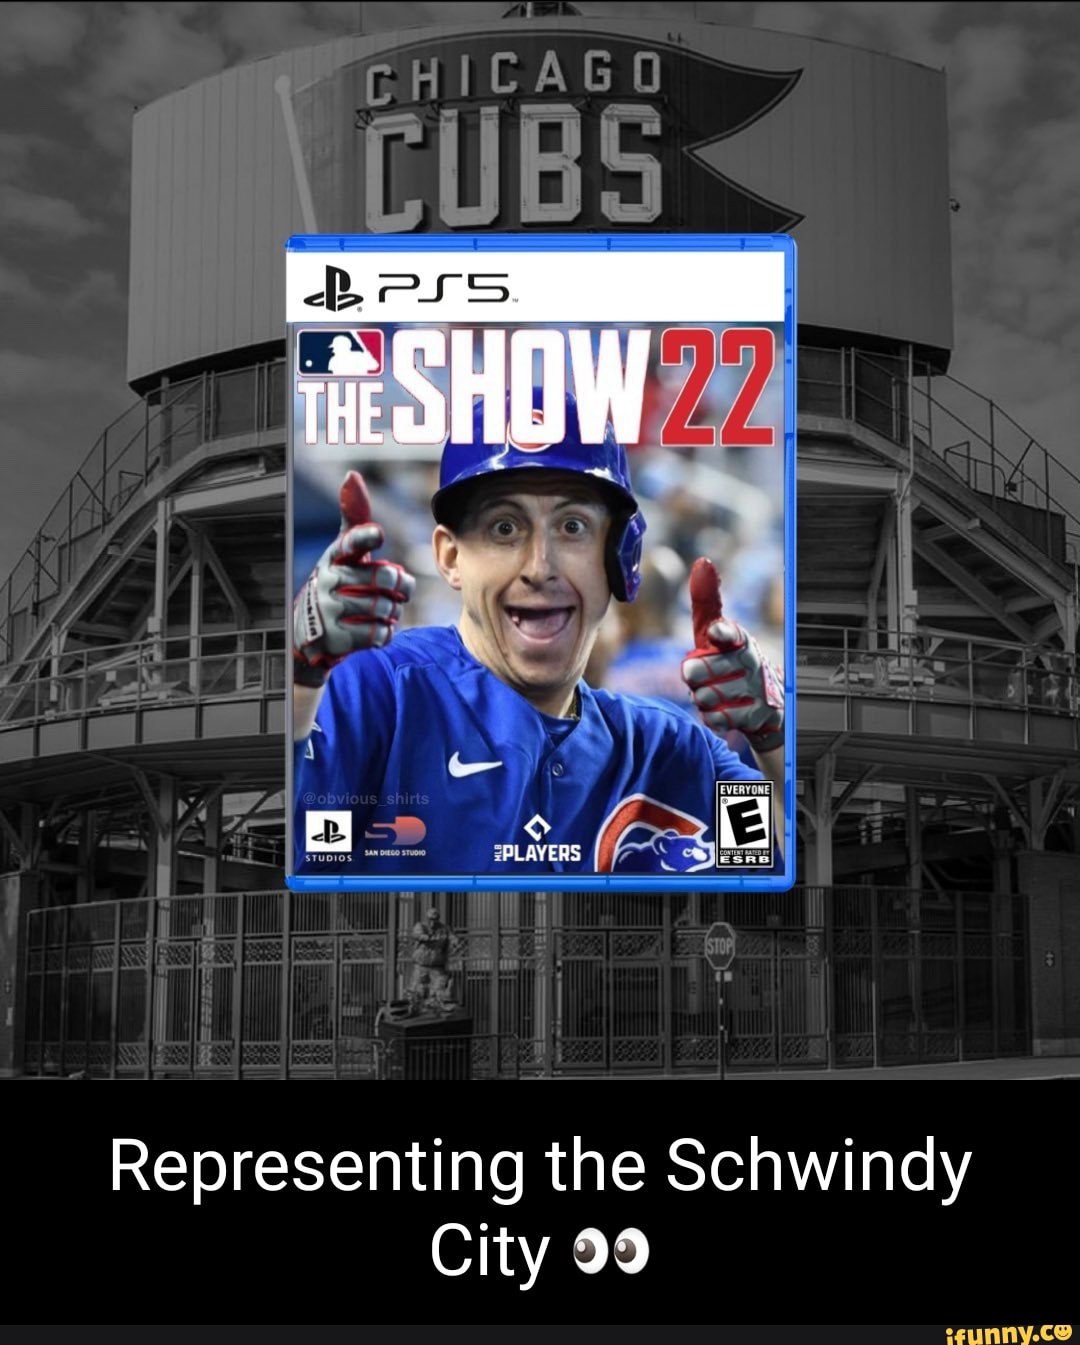 Mlbtheshow memes. Best Collection of funny Mlbtheshow pictures on iFunny